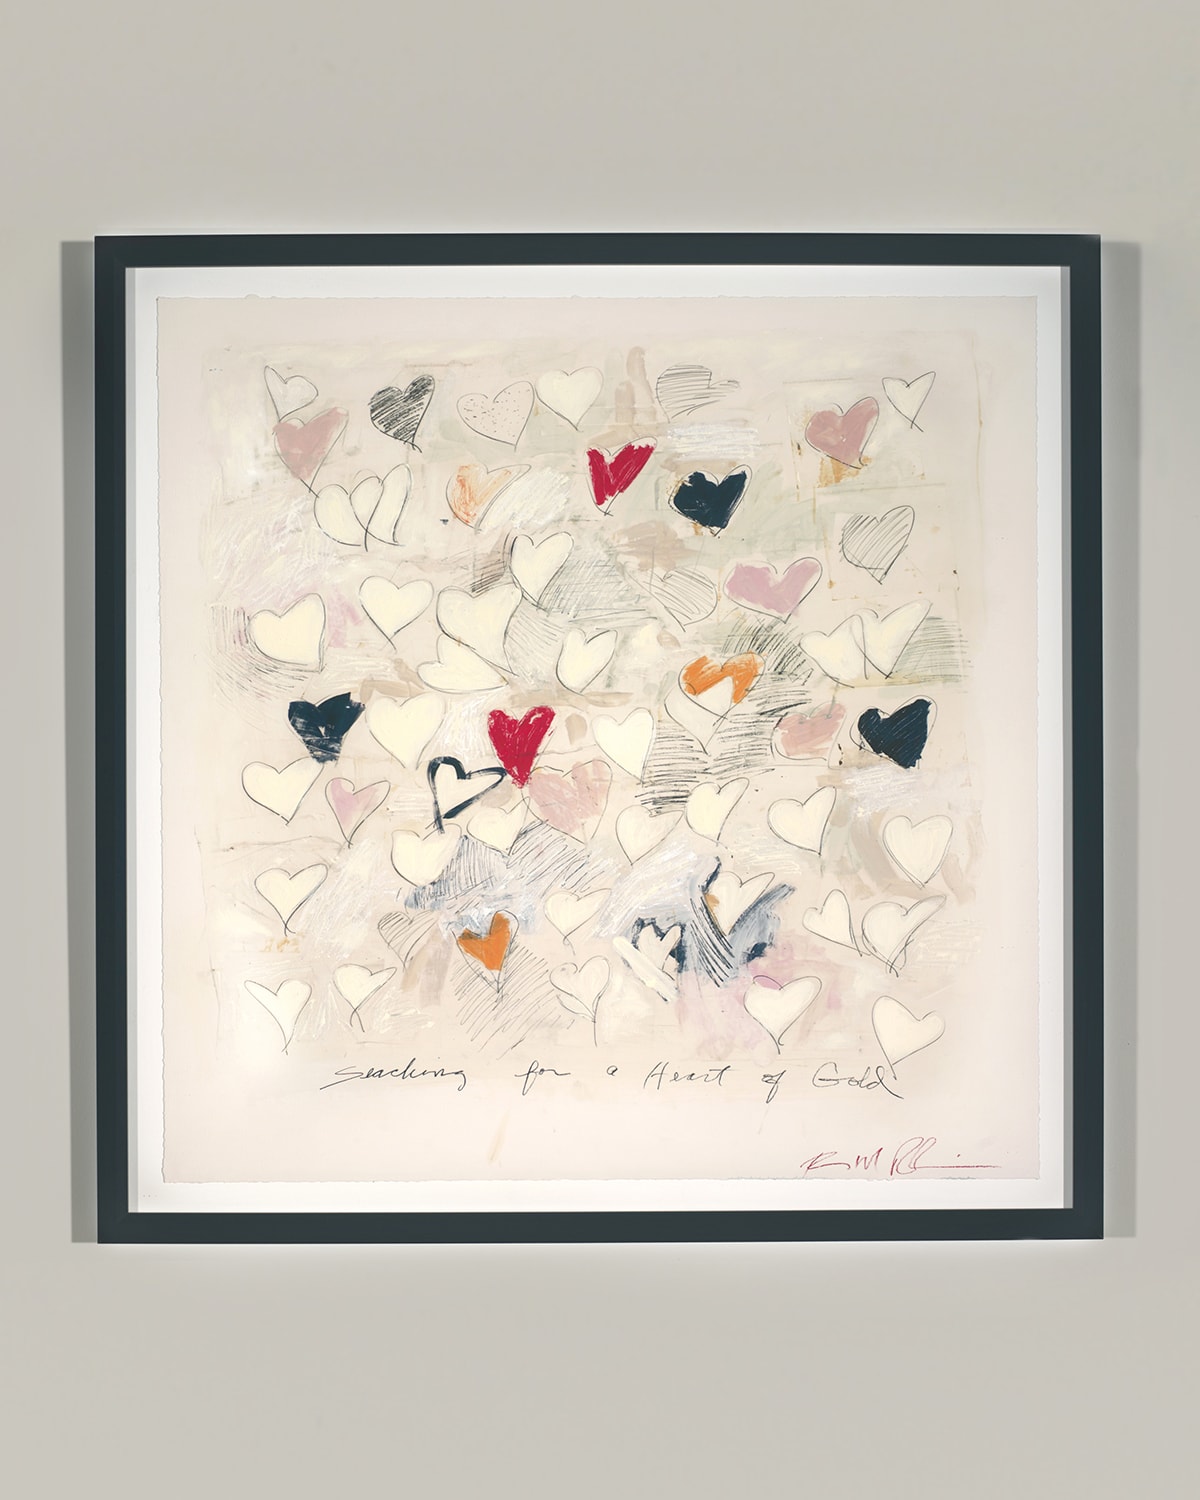 "Searching For A Heart of Gold #2" Giclee Wall Art by Robert Robinson